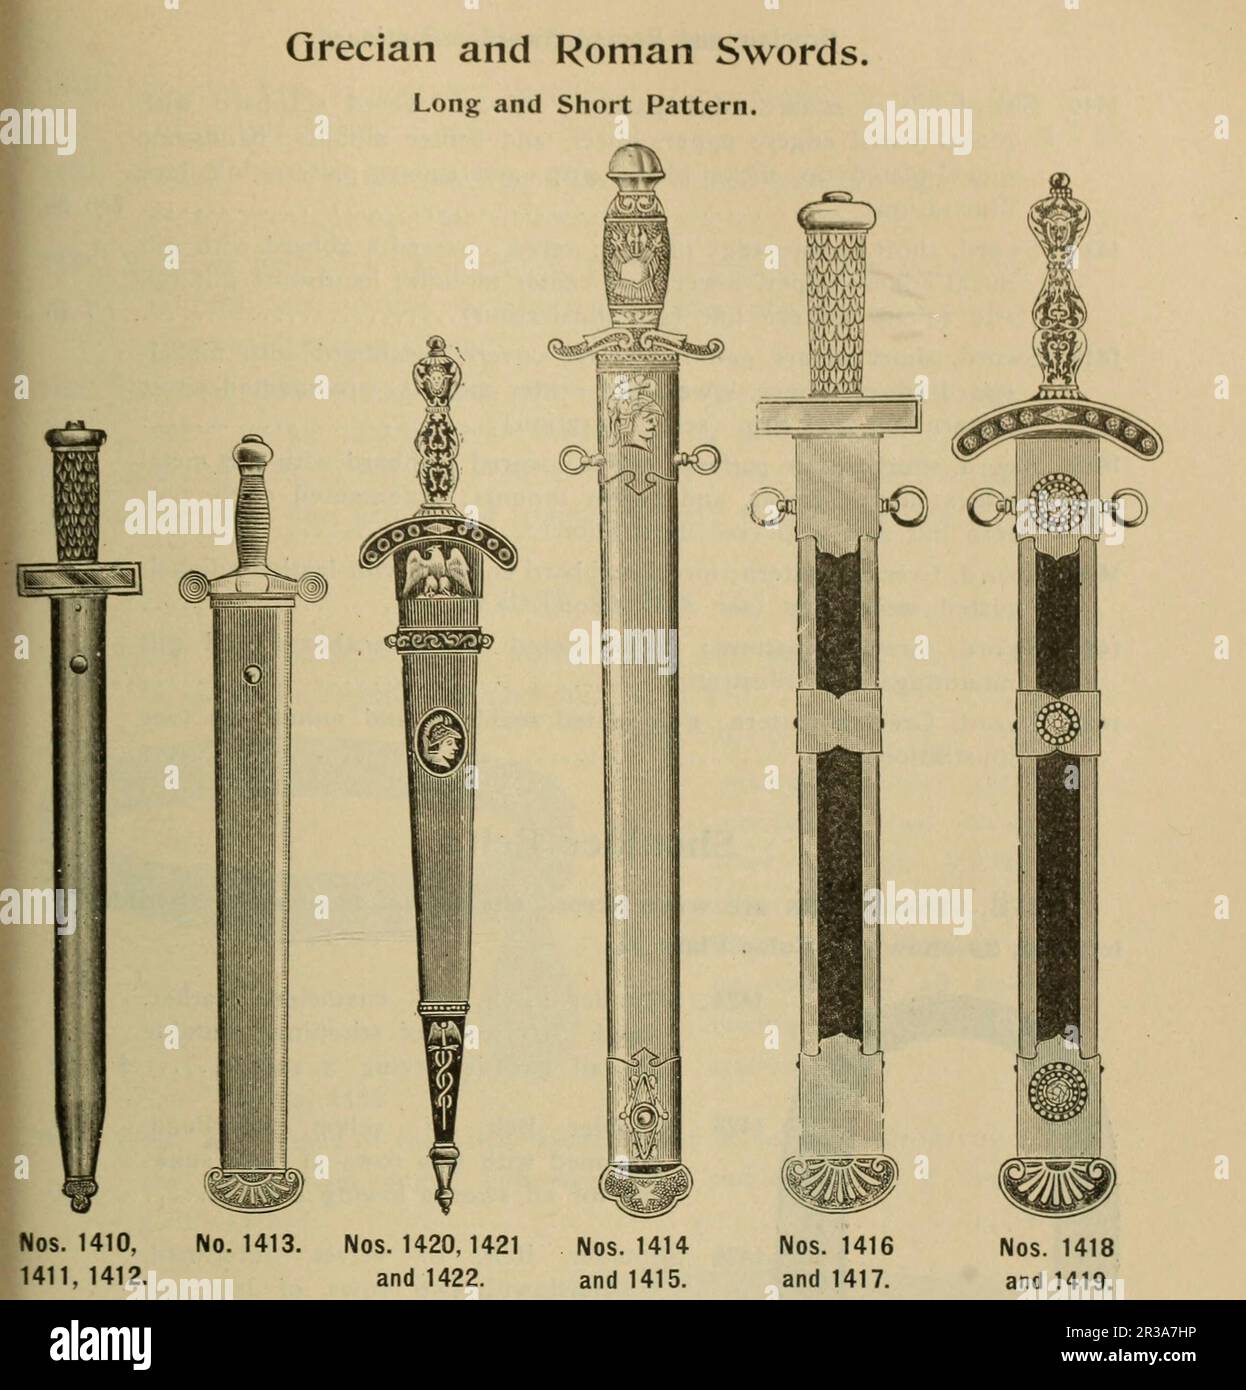 Grecian and Roman swords from the catalogue ' Illustrated catalogue and price list; Knights of Pythias lodge paraphernalia and costumes for all three ranks ' The Knights of Pythias is a fraternal organization and secret society founded in Washington, D.C., on February 19, 1864. The Knights of Pythias is the first fraternal organization to receive a charter under an act of the United States Congress. It was founded by Justus H. Rathbone, who had been inspired by a play by the Irish poet John Banim about the legend of Damon and Pythias. This legend illustrates the ideals of loyalty, honor, and f Stock Photo